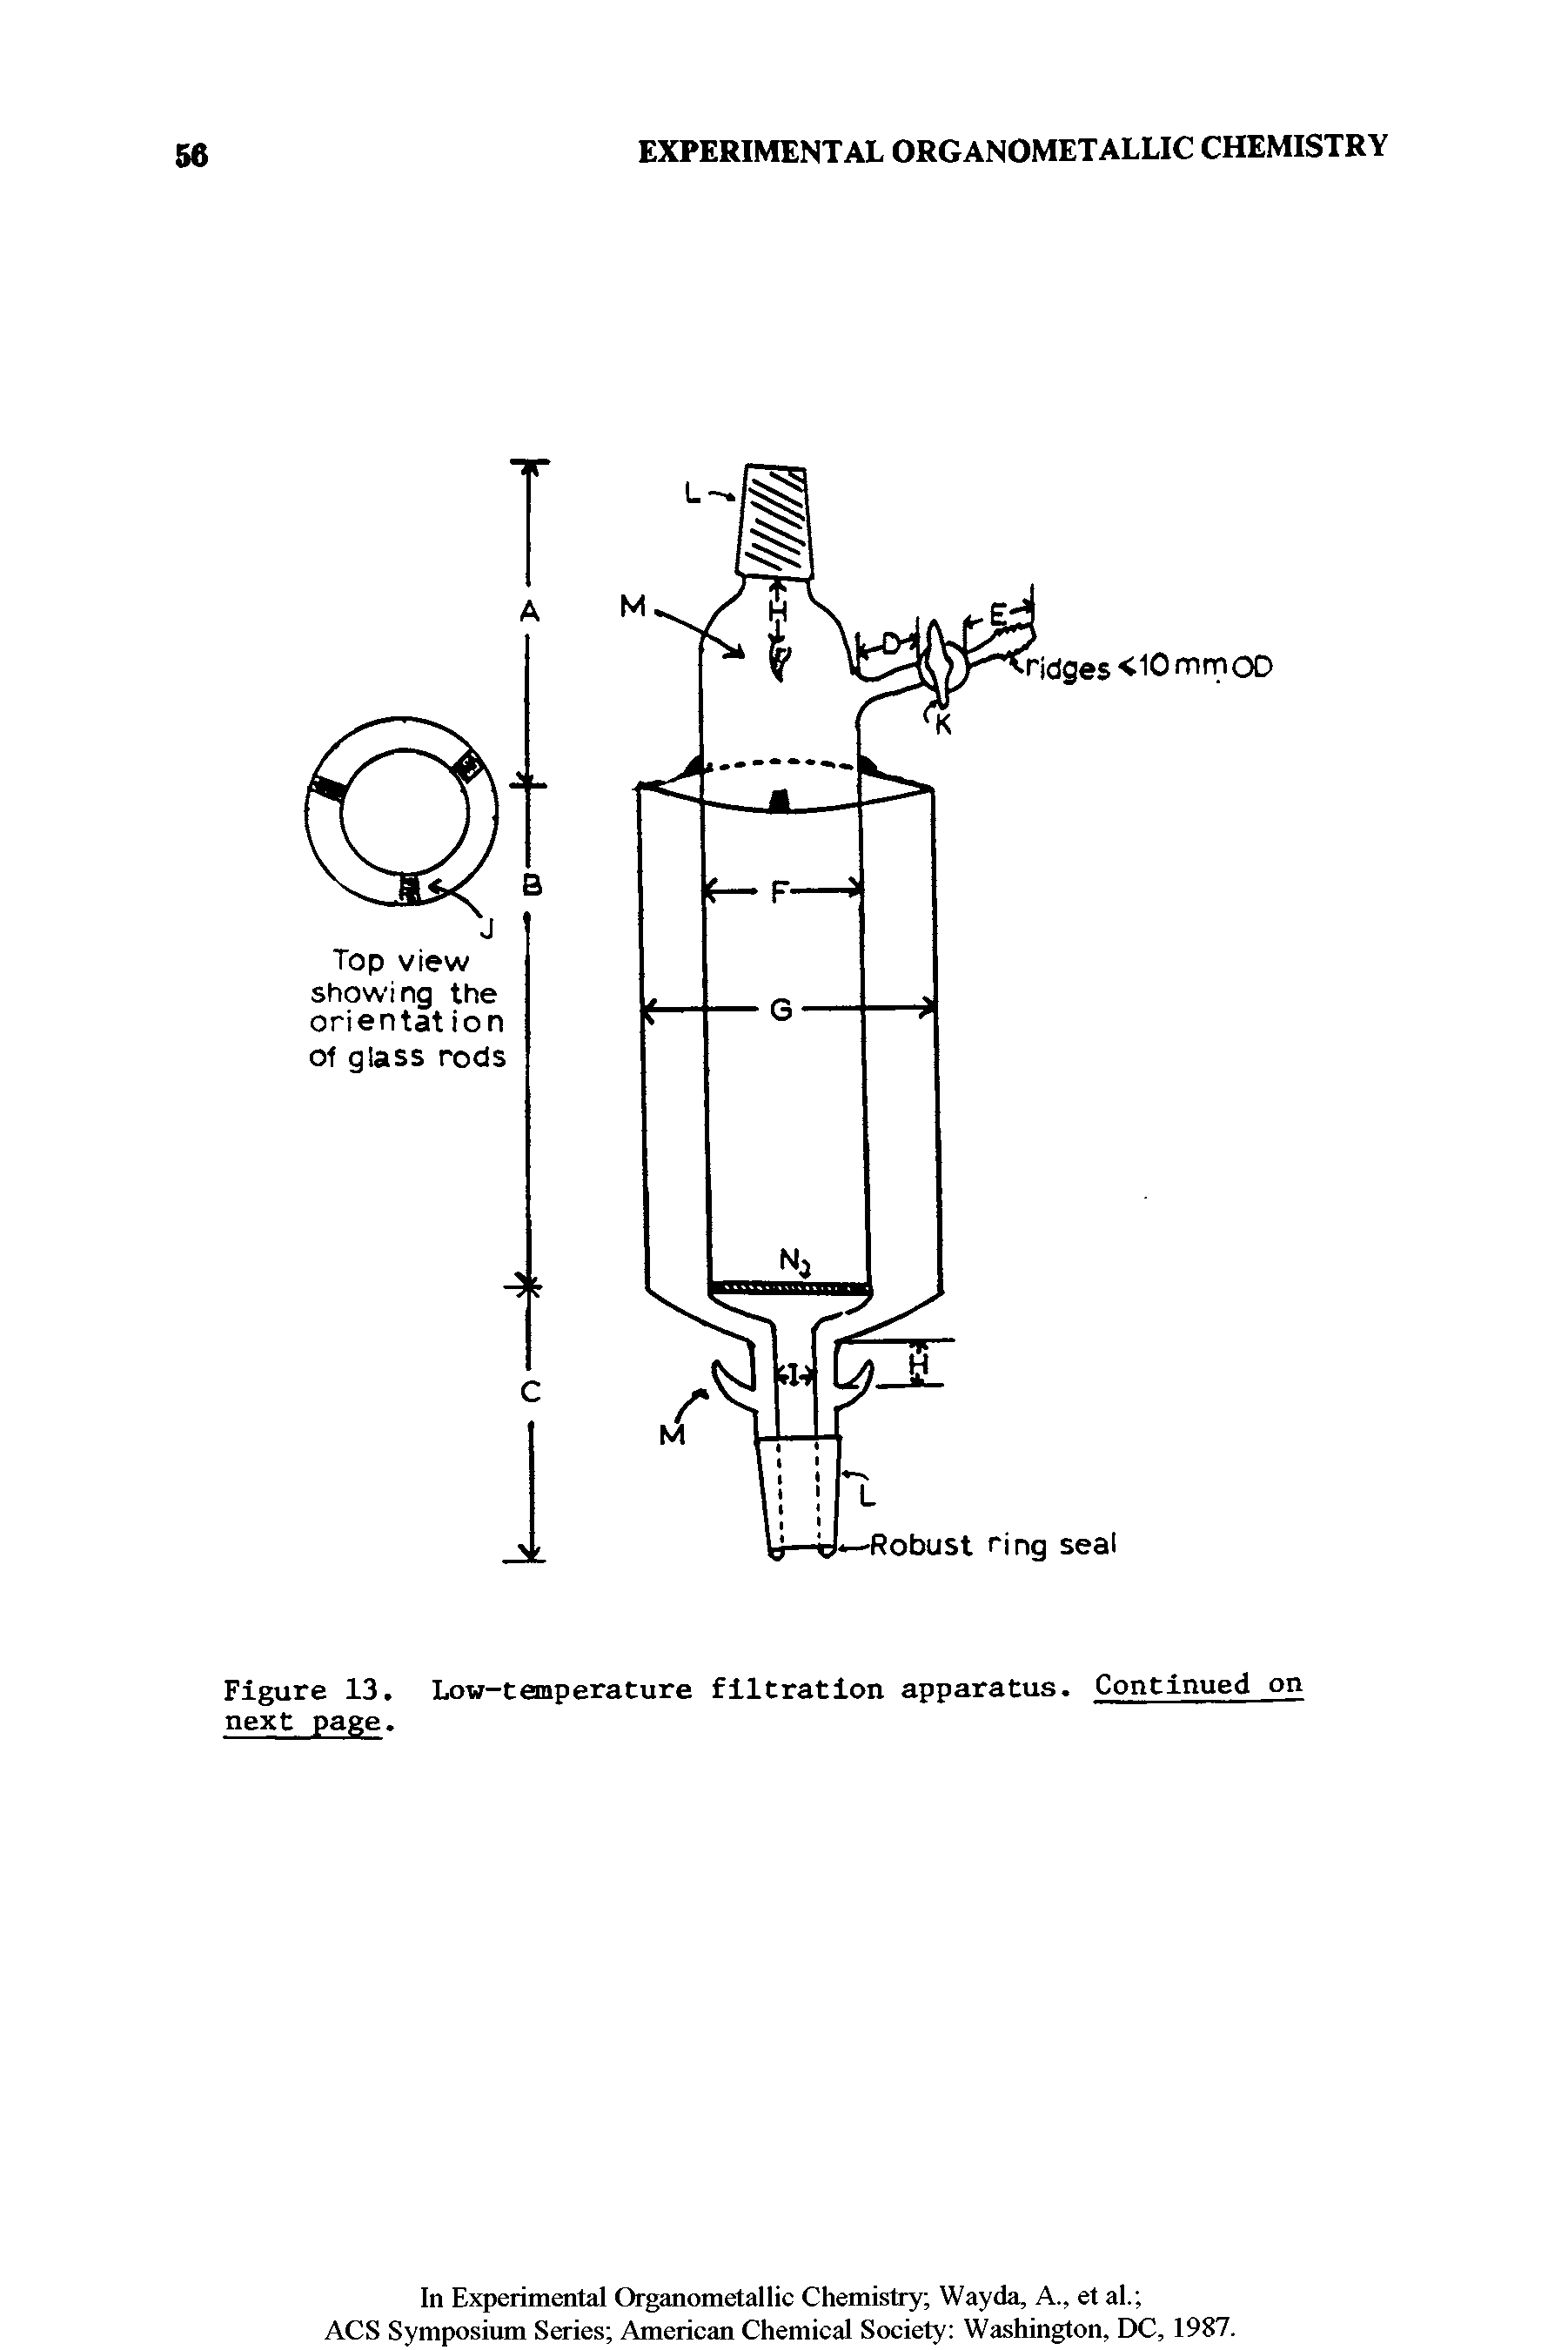 Figure 13. Low-temperature filtration apparatus. Continued on next page.